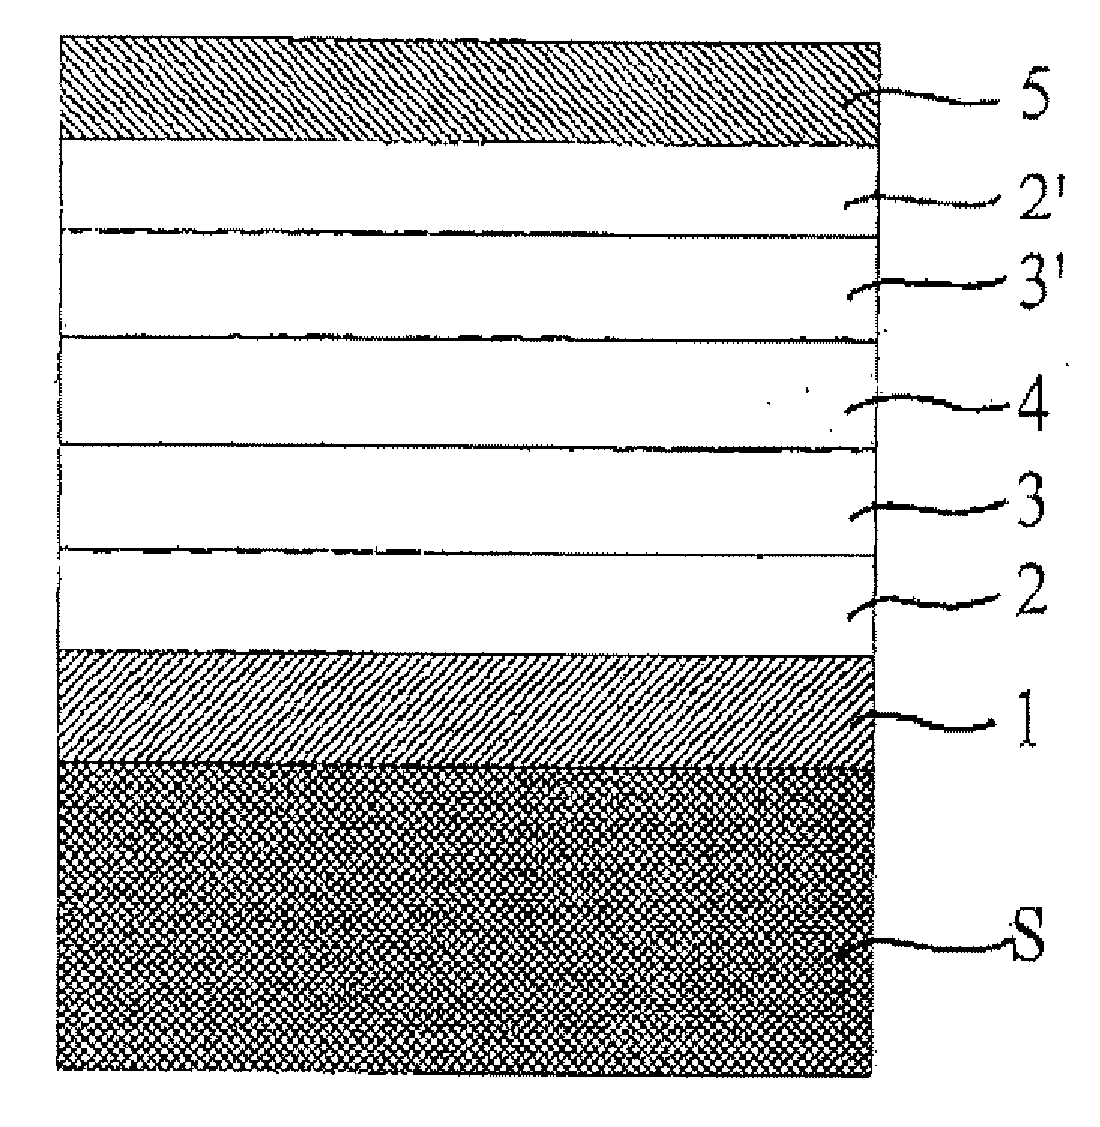 Arrangement for an Organic Pin-Type Light-Emitting Diode and Method for Manufacturing